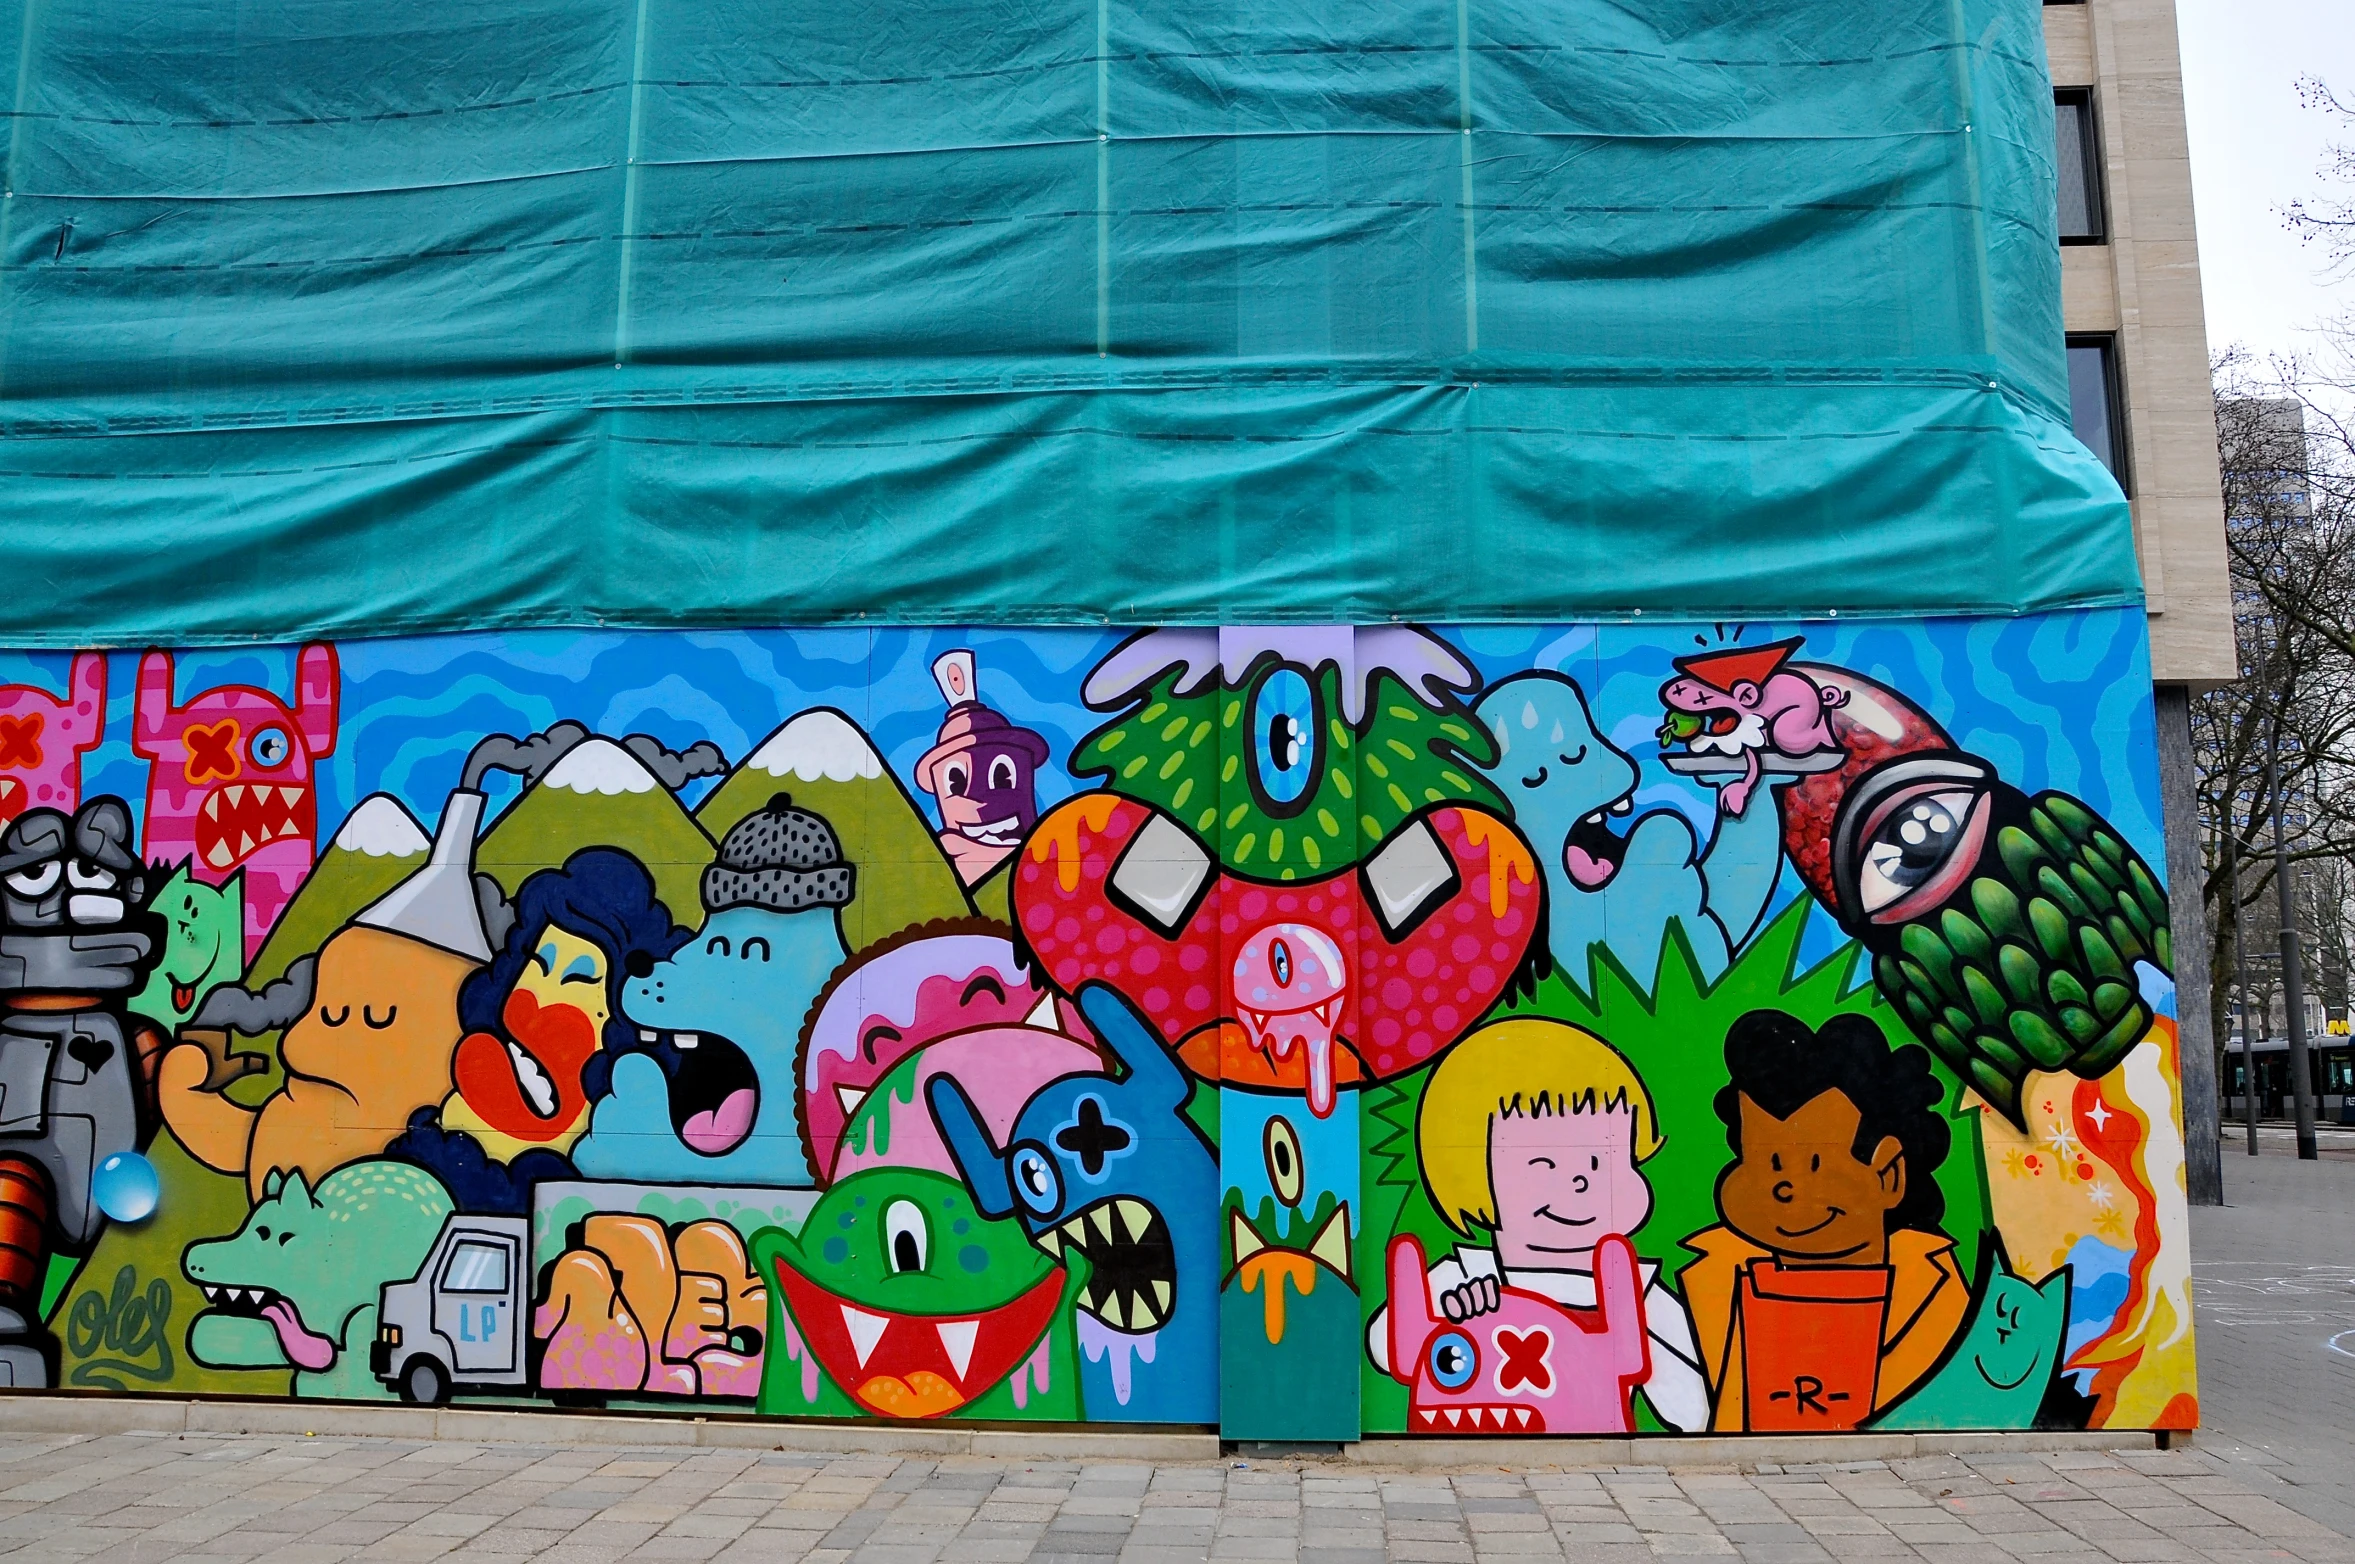 colorful graffiti artwork with many heads on a building